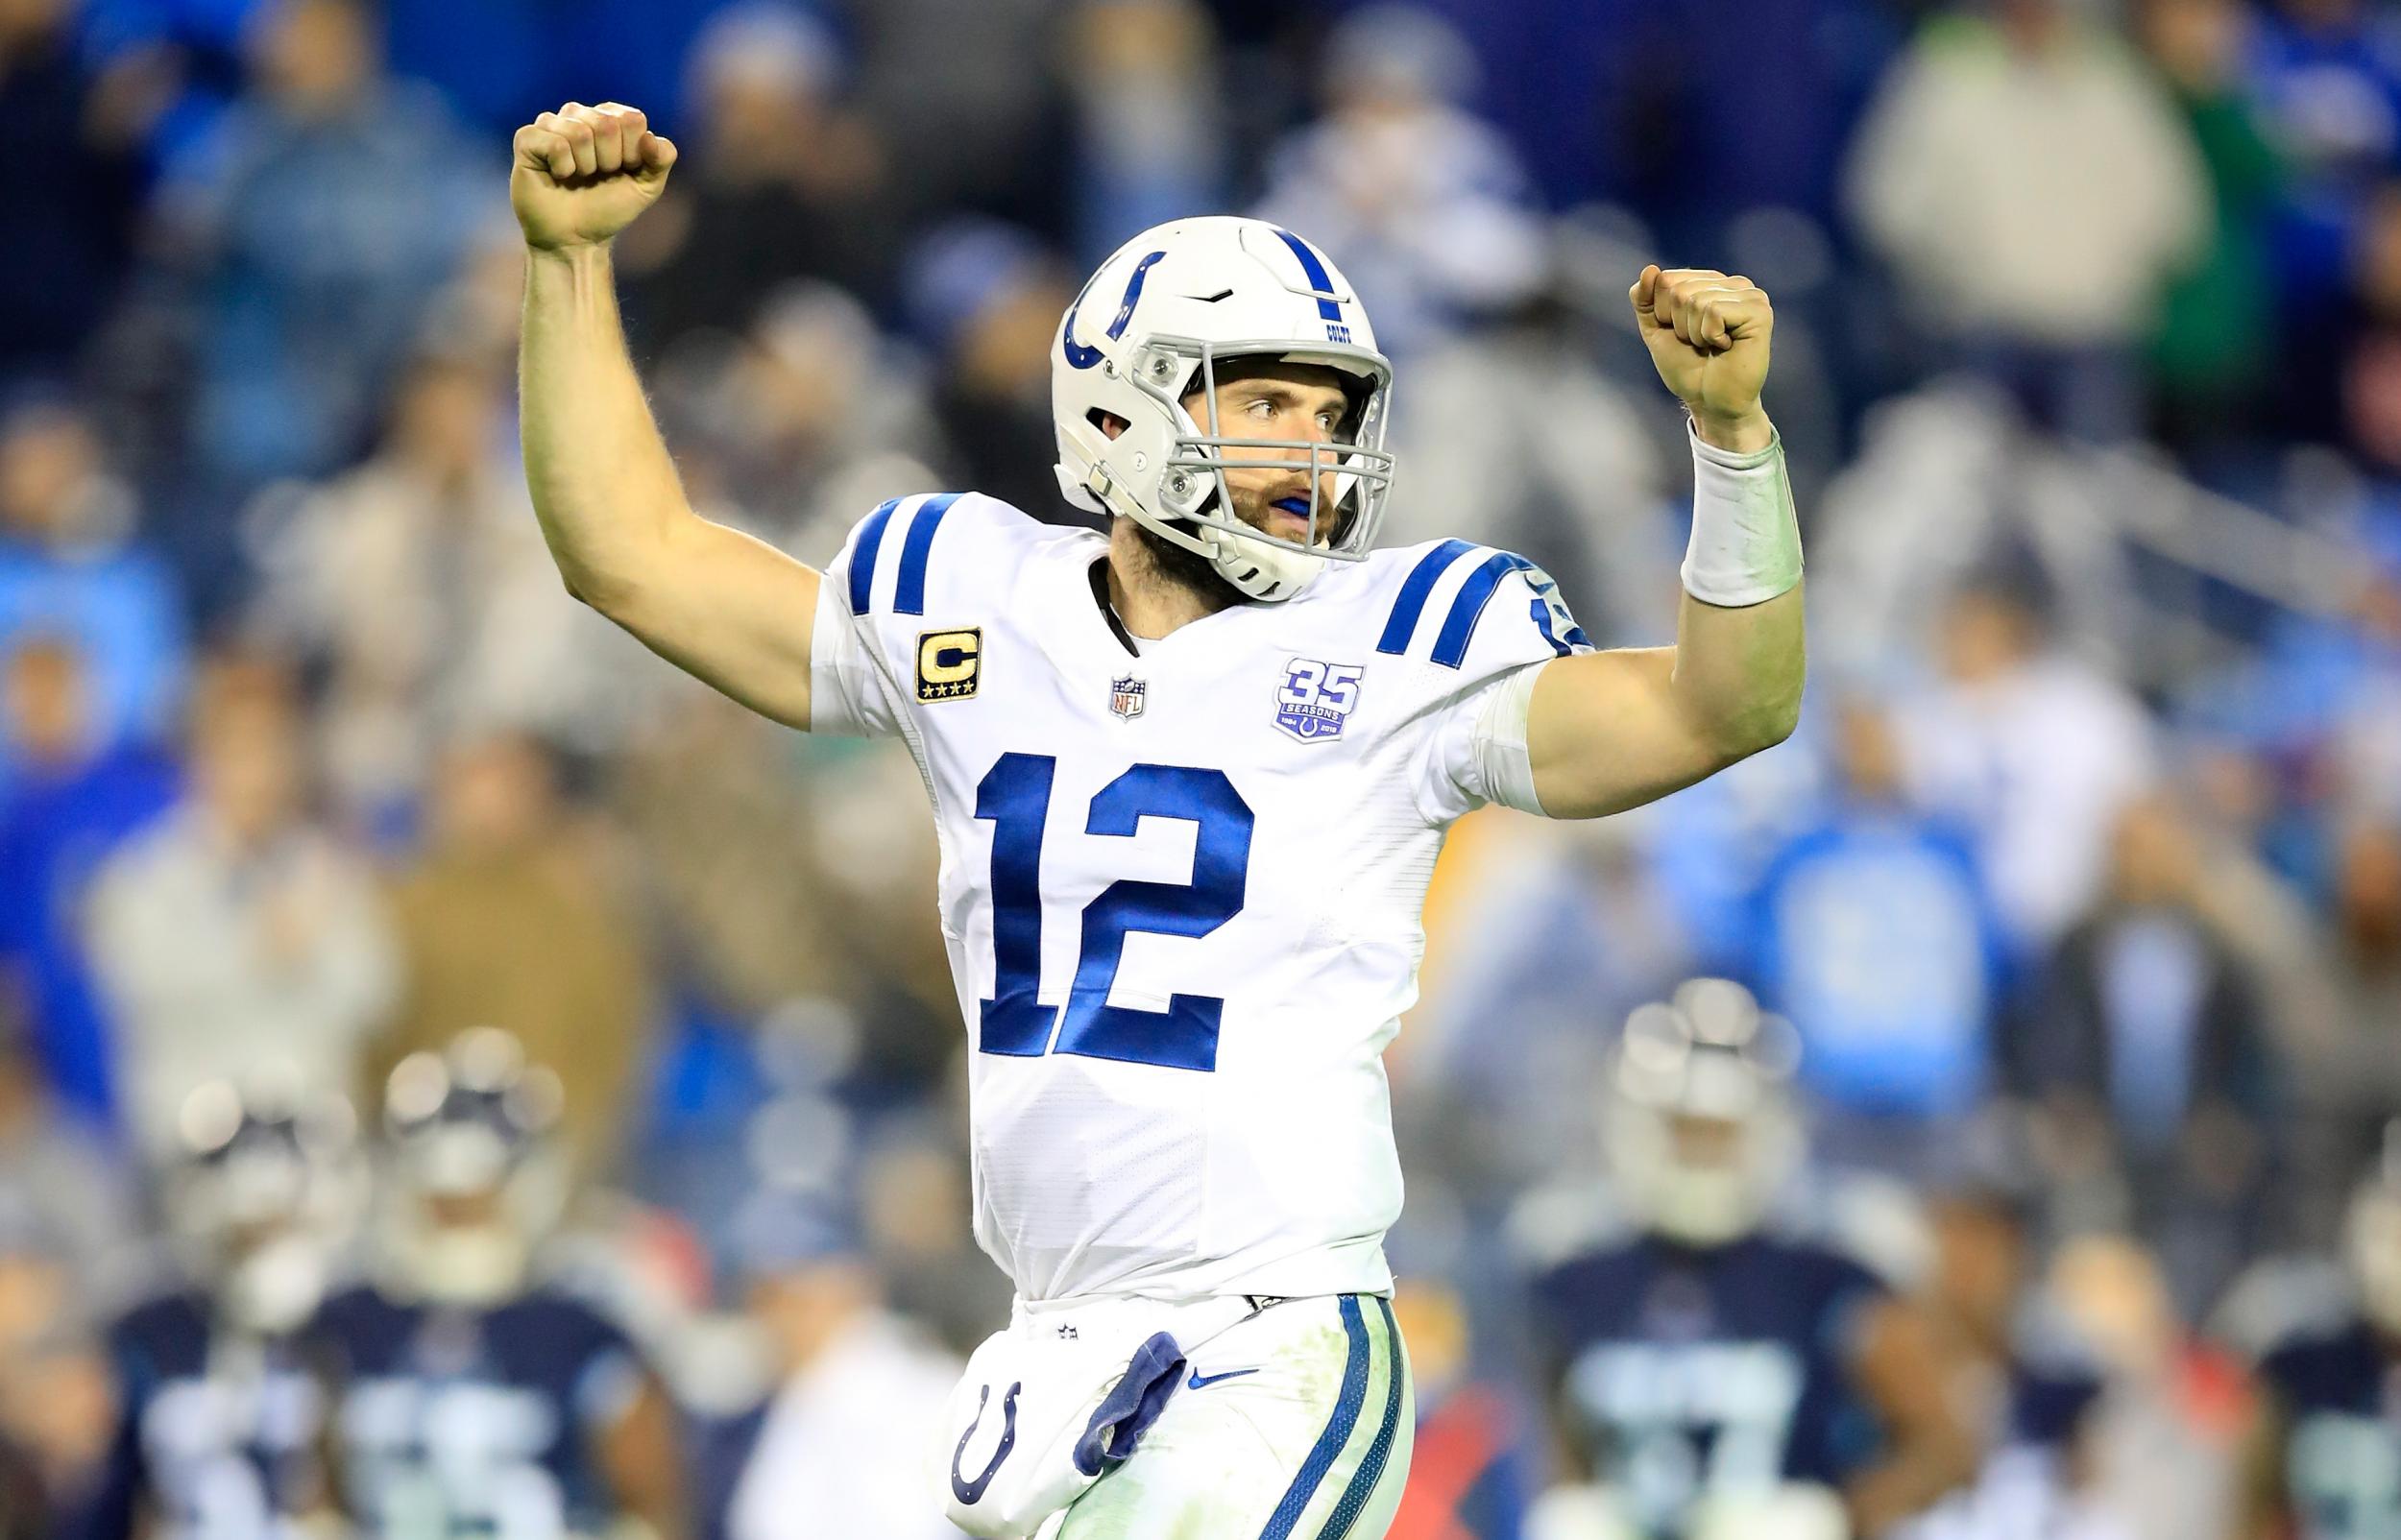 Andrew Luck is tipped to lead the Colts back to the Super Bowl